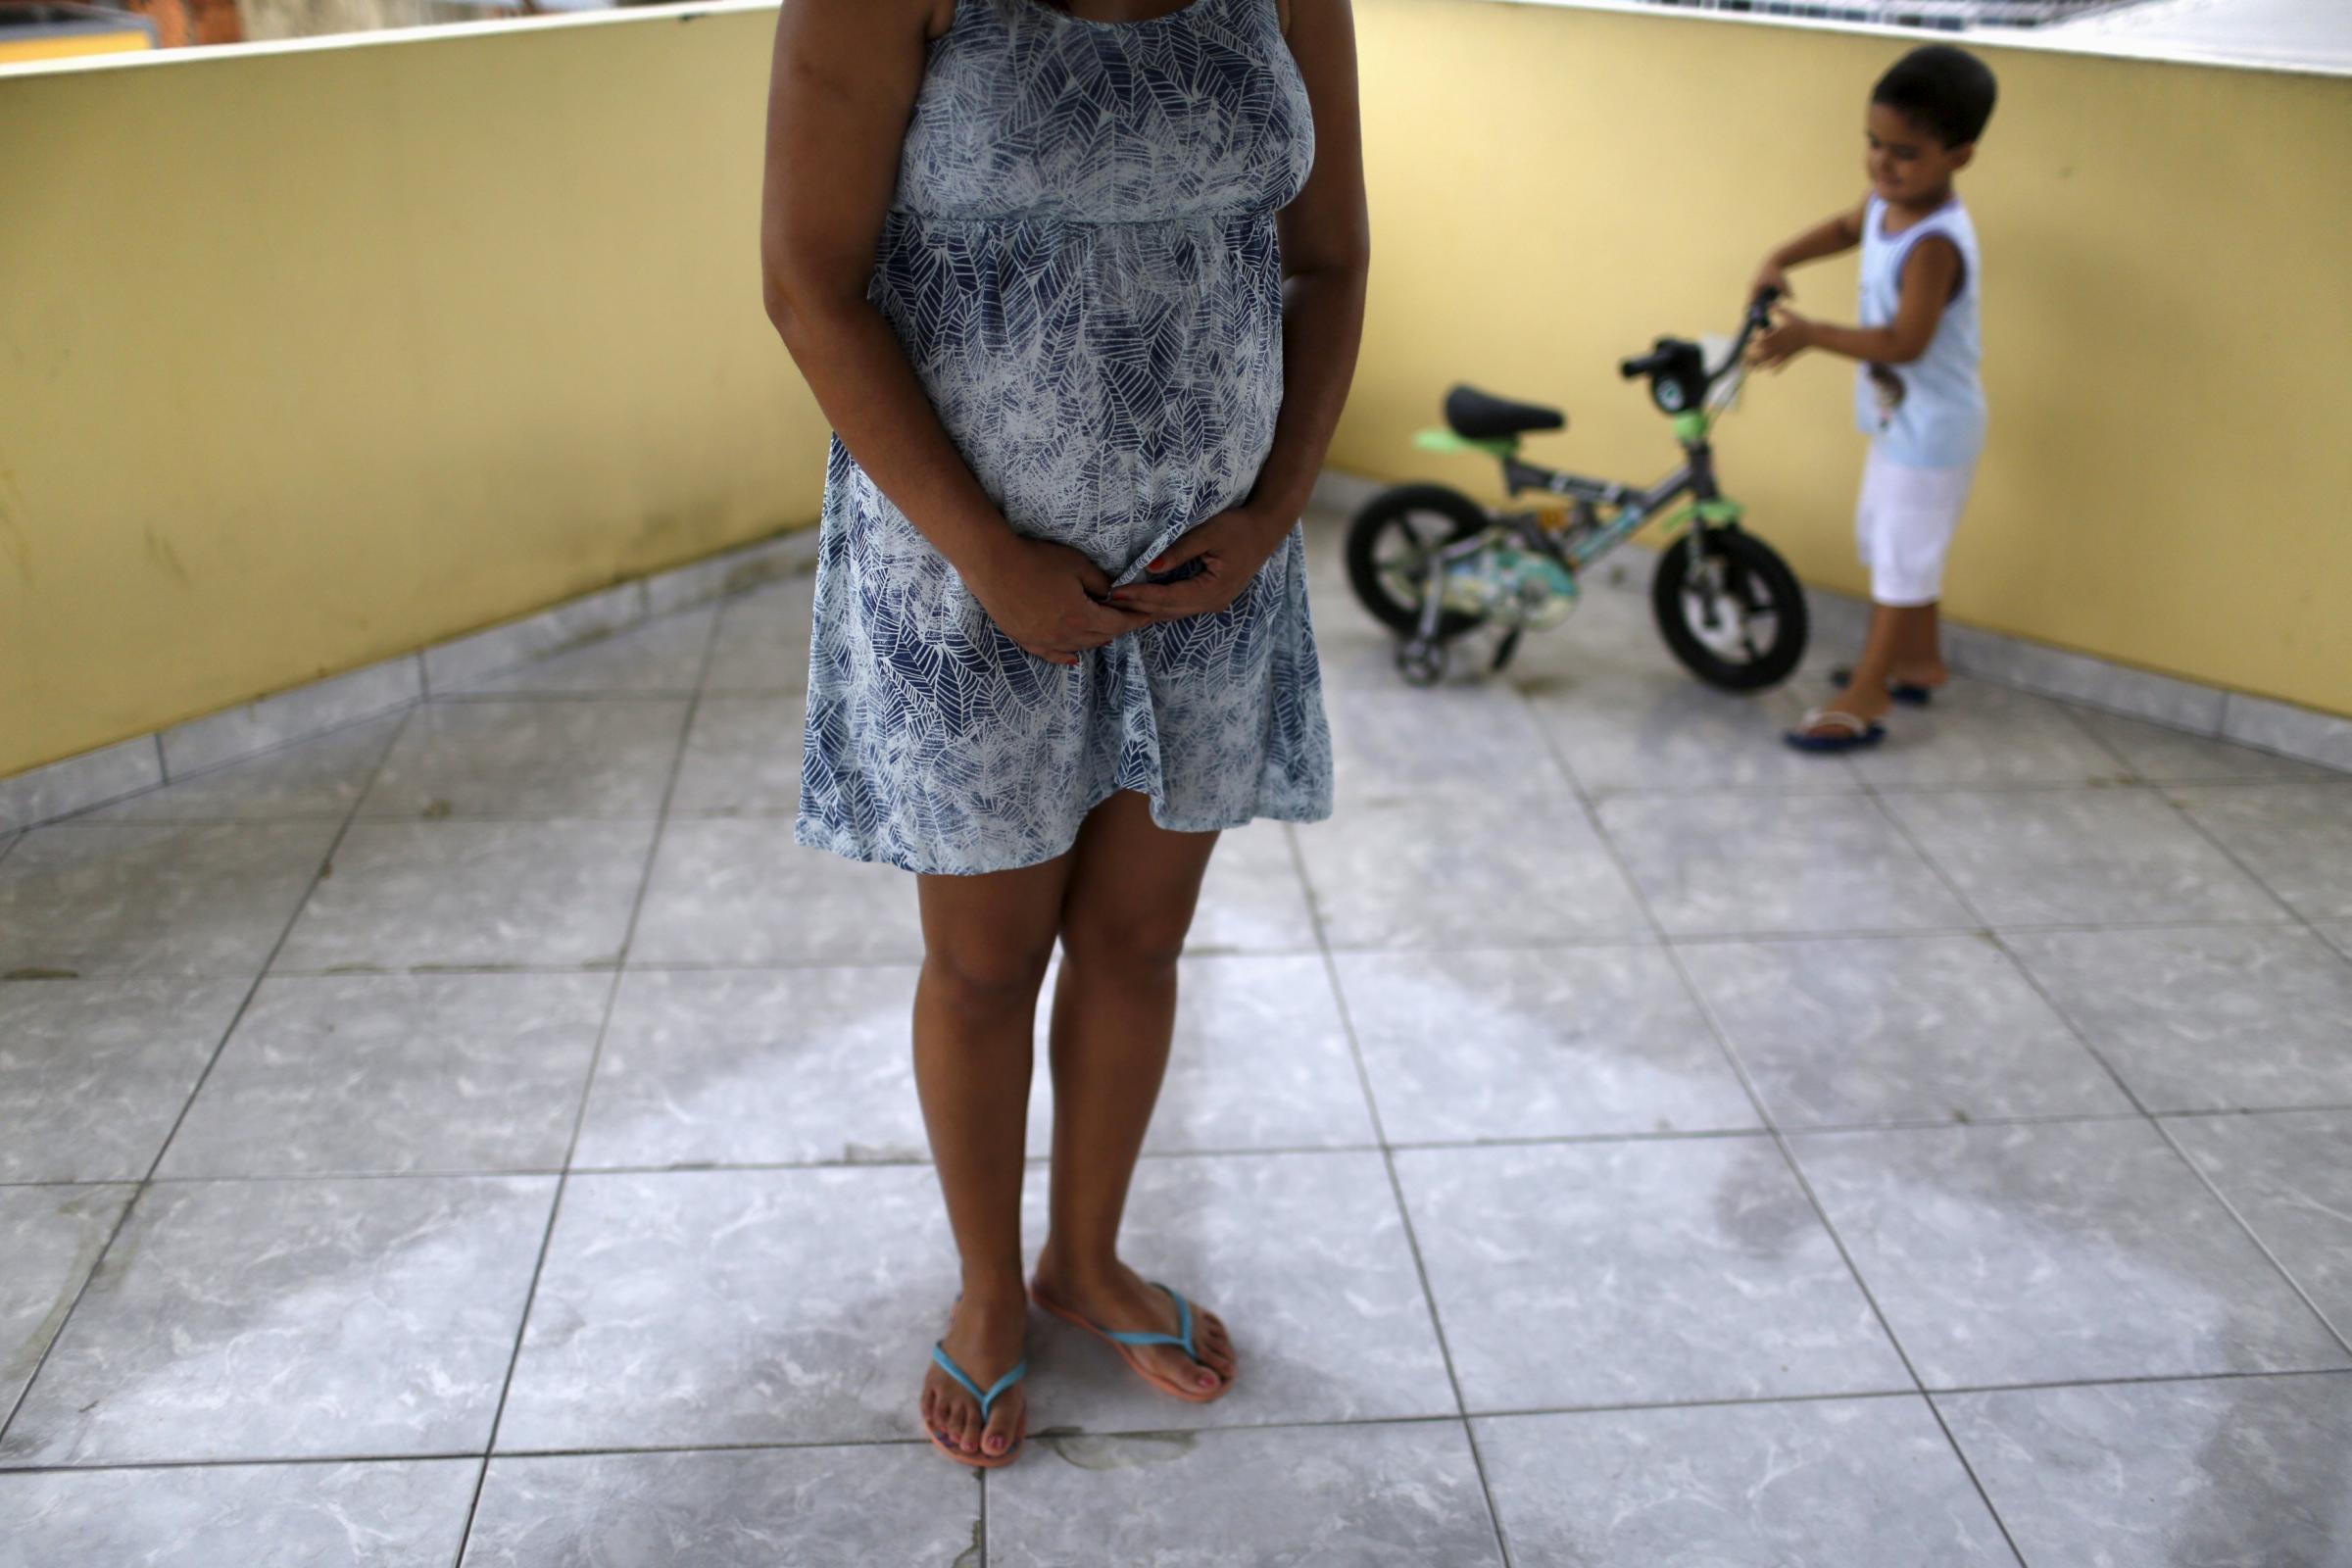 Gisele Felix, who is five months pregnant, stands on a terrace next to her son, Joao, at her home in Rio de Janeiro, Brazil, Jan. 28, 2016. Felix, who is concerned about the Zika virus, has not gone out of her house during her 30-day vacation, keeping all the windows and doors closed in an effort to keep out mosquitoes.